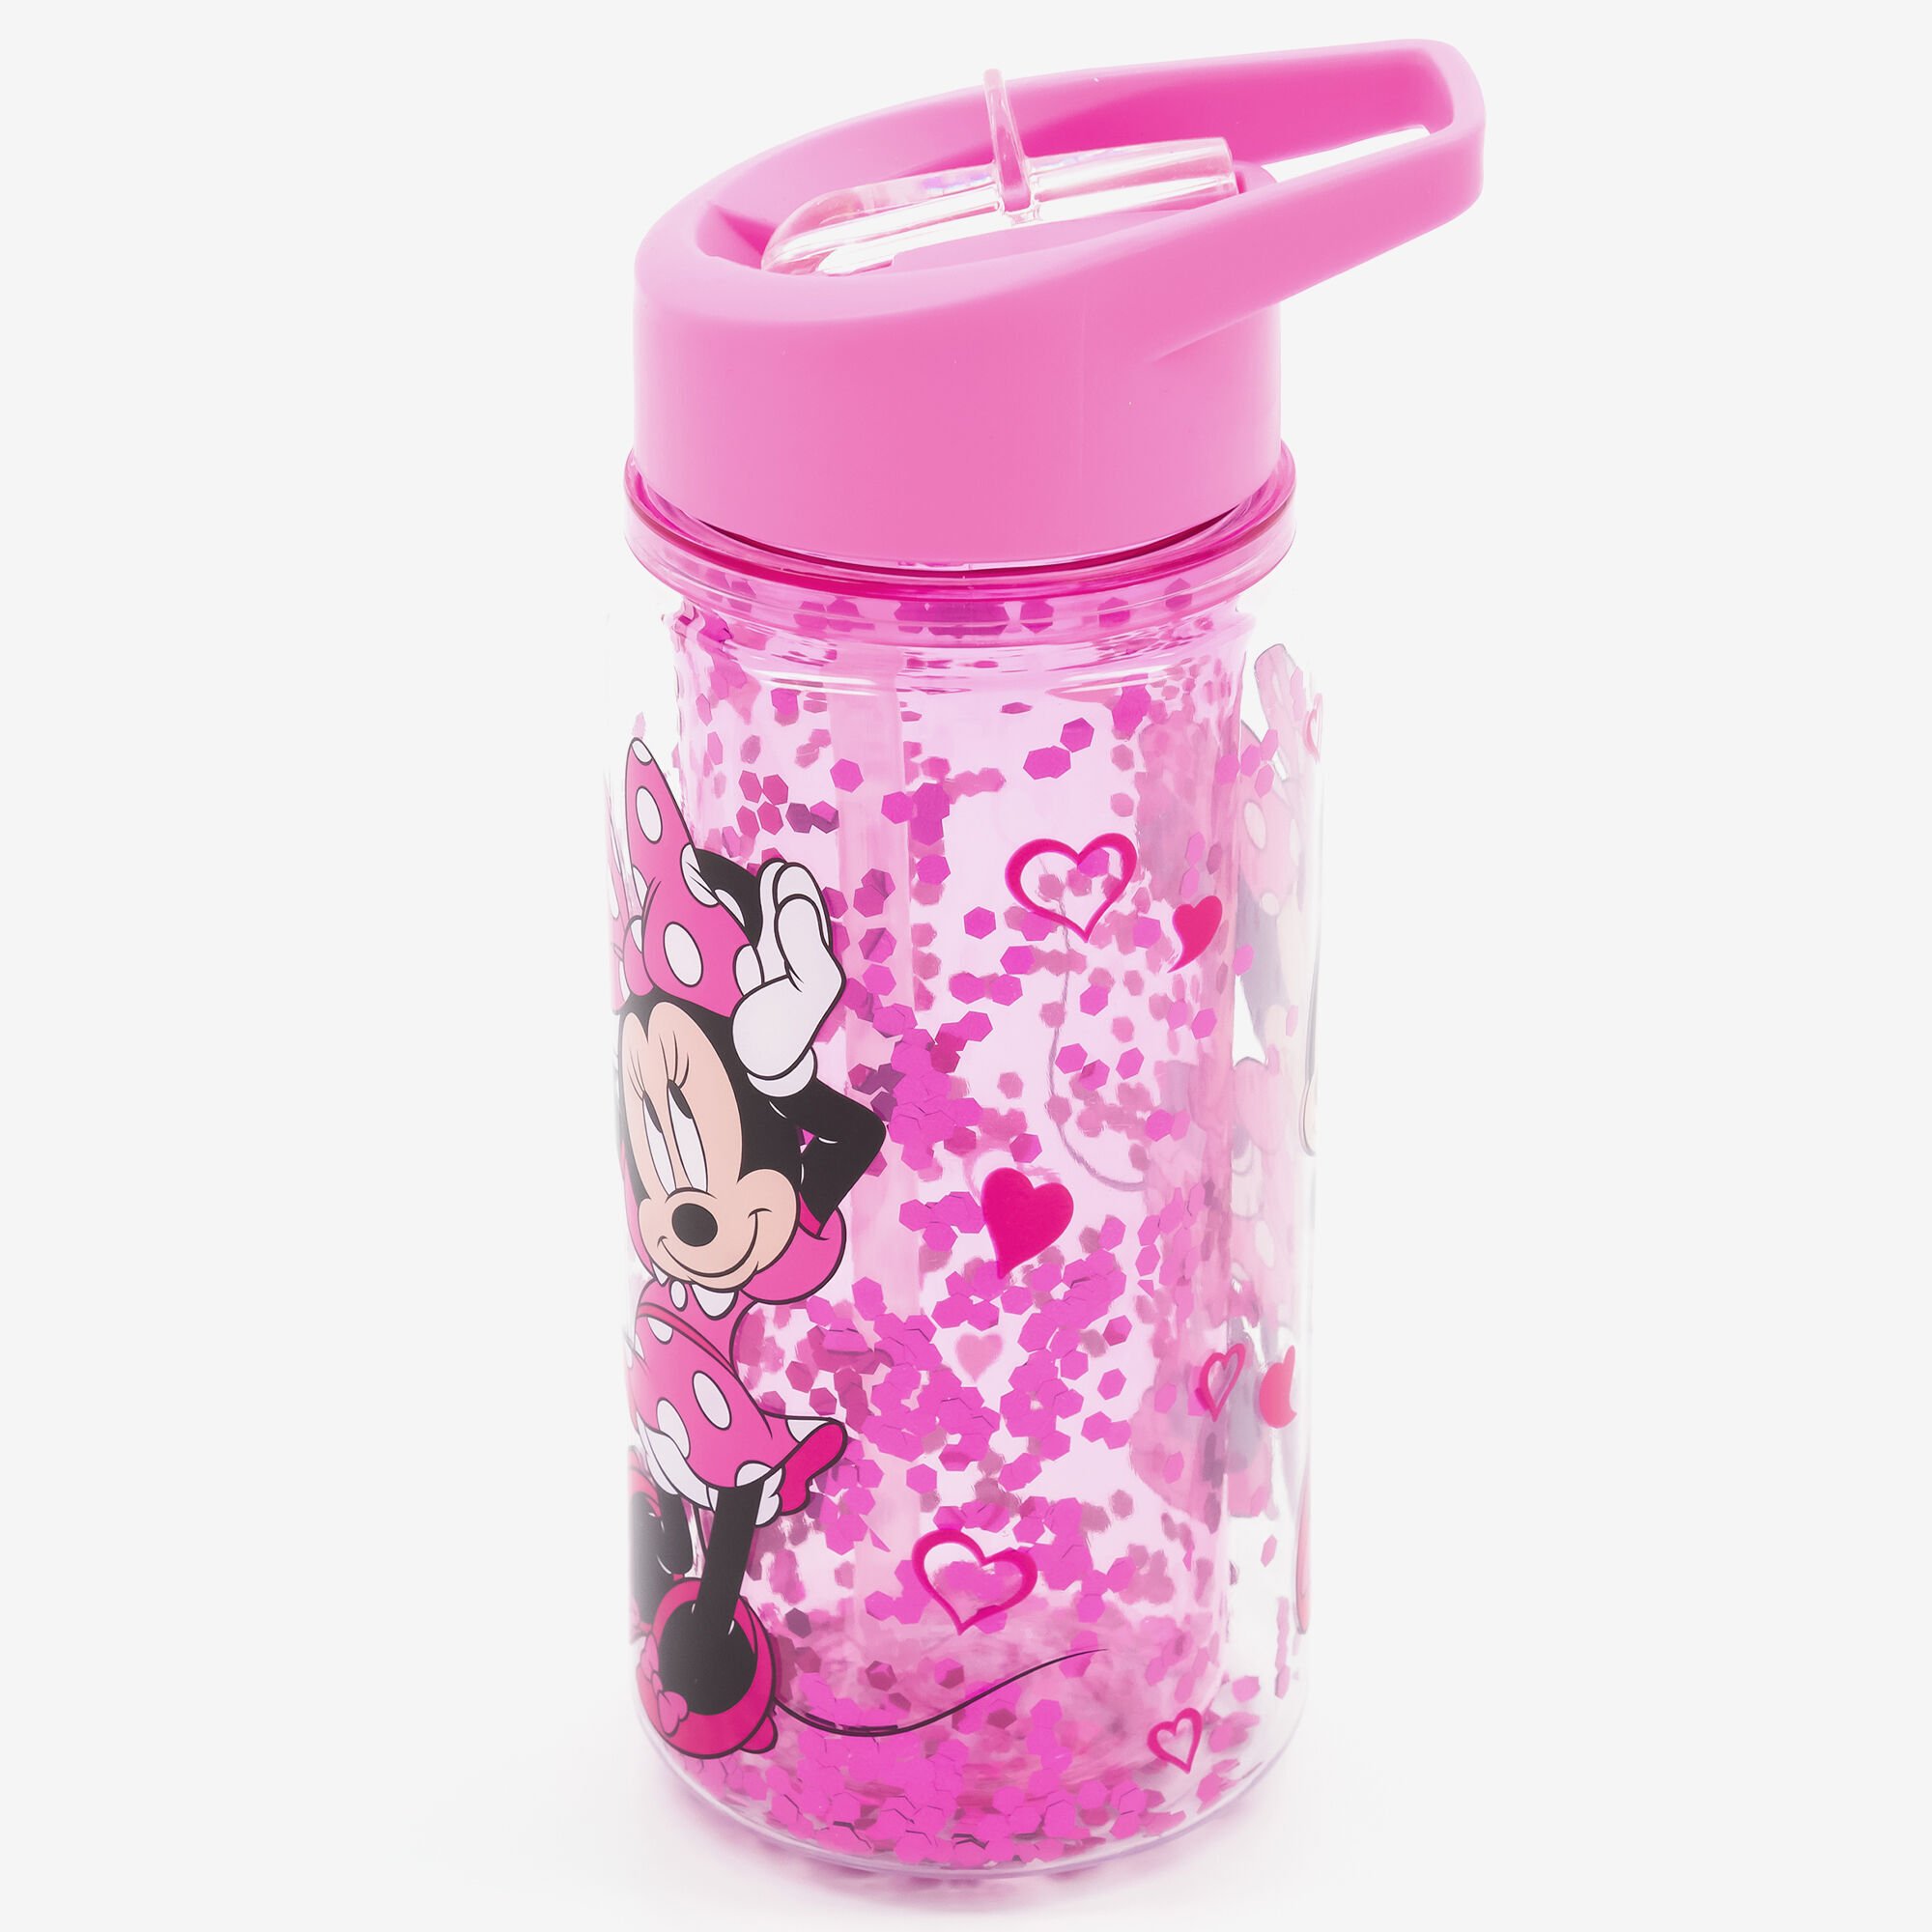 View Claires Disney Minnie Shaker Mouse Water Bottle information